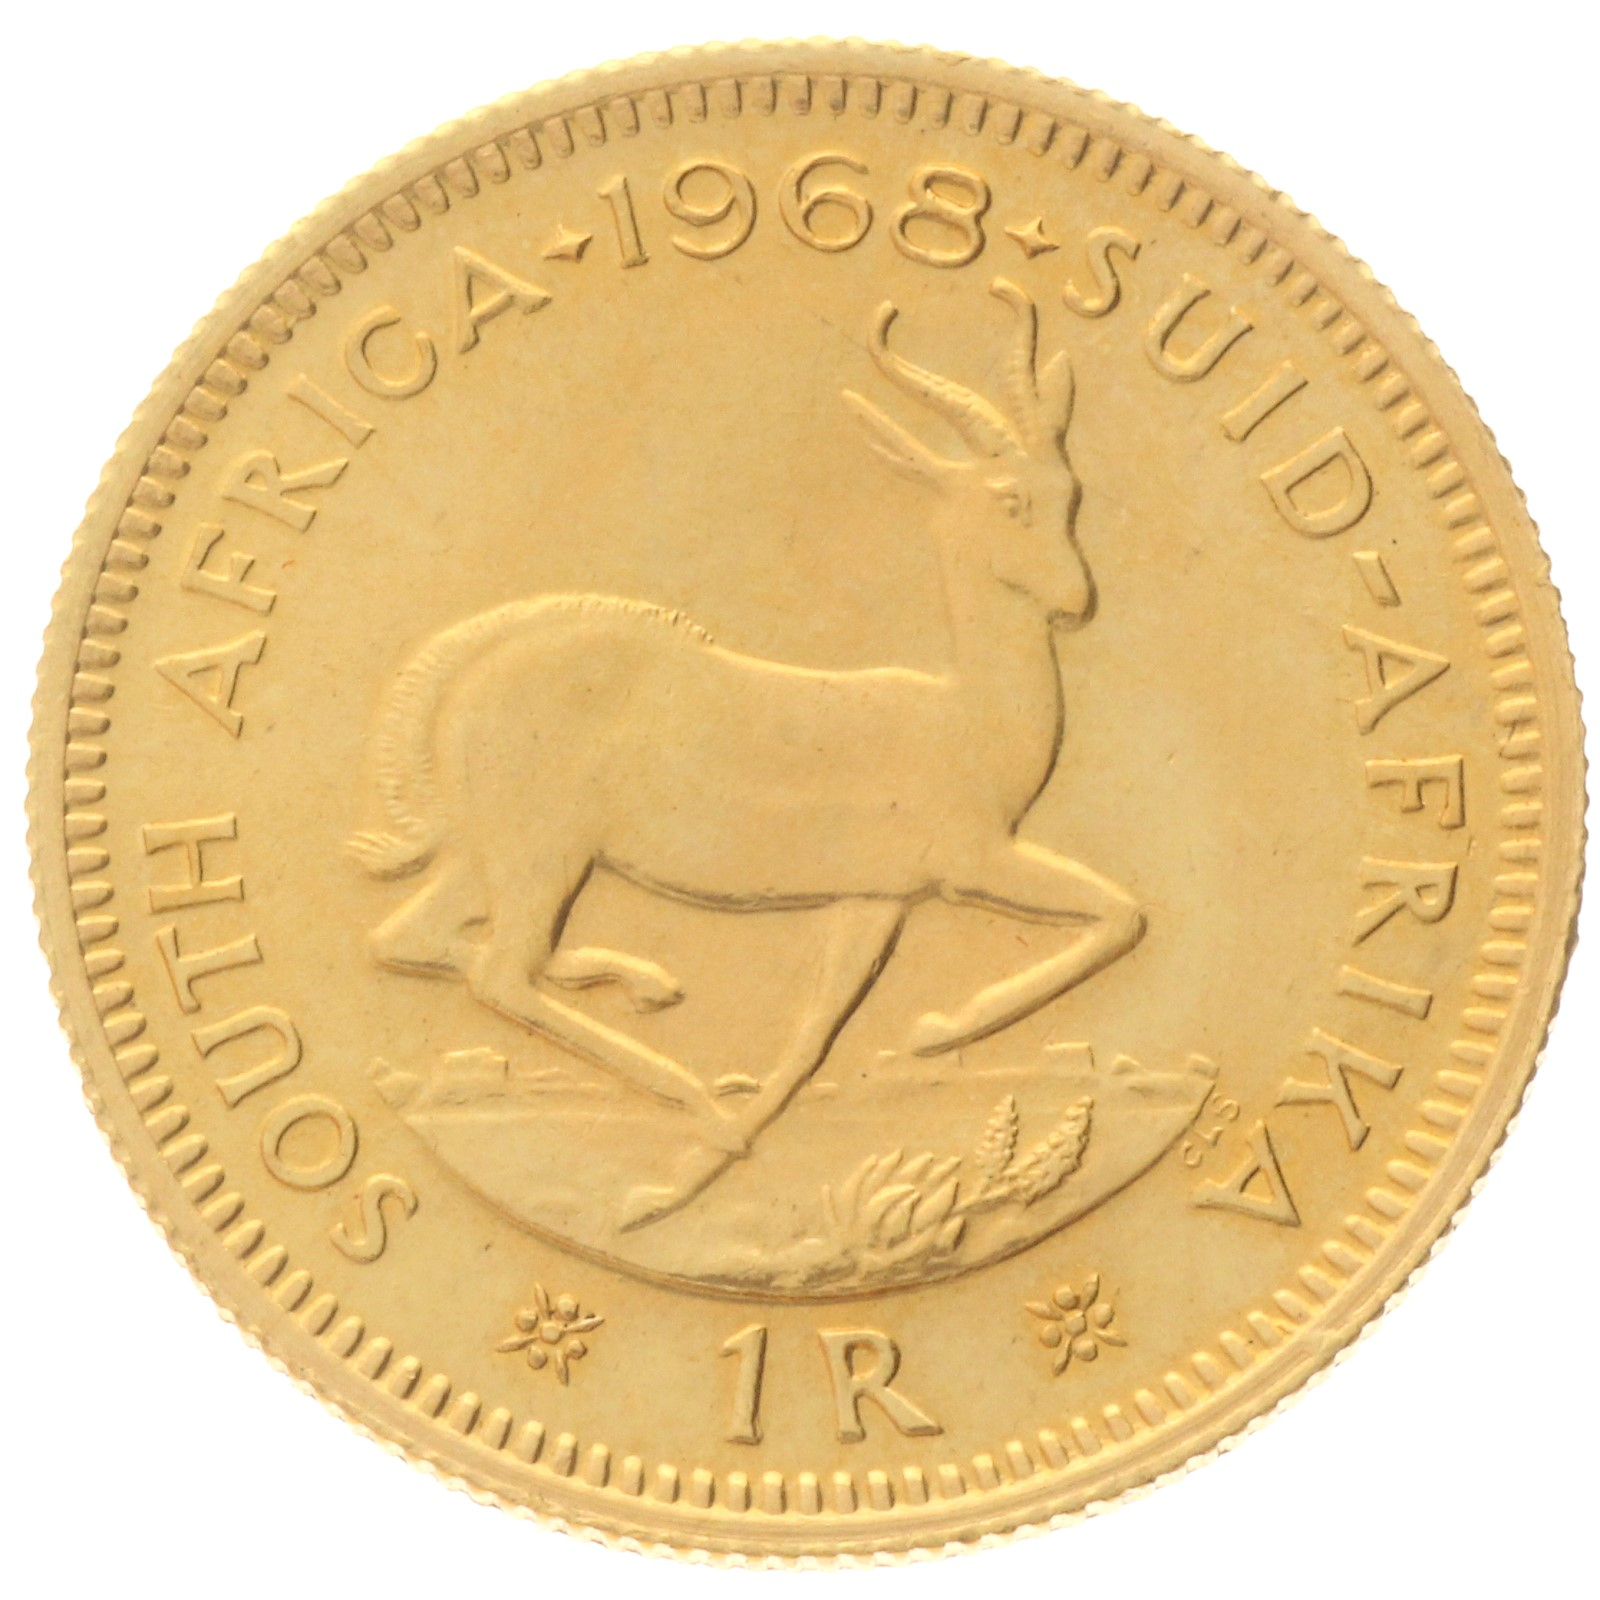 South Africa - 1 rand - 1968